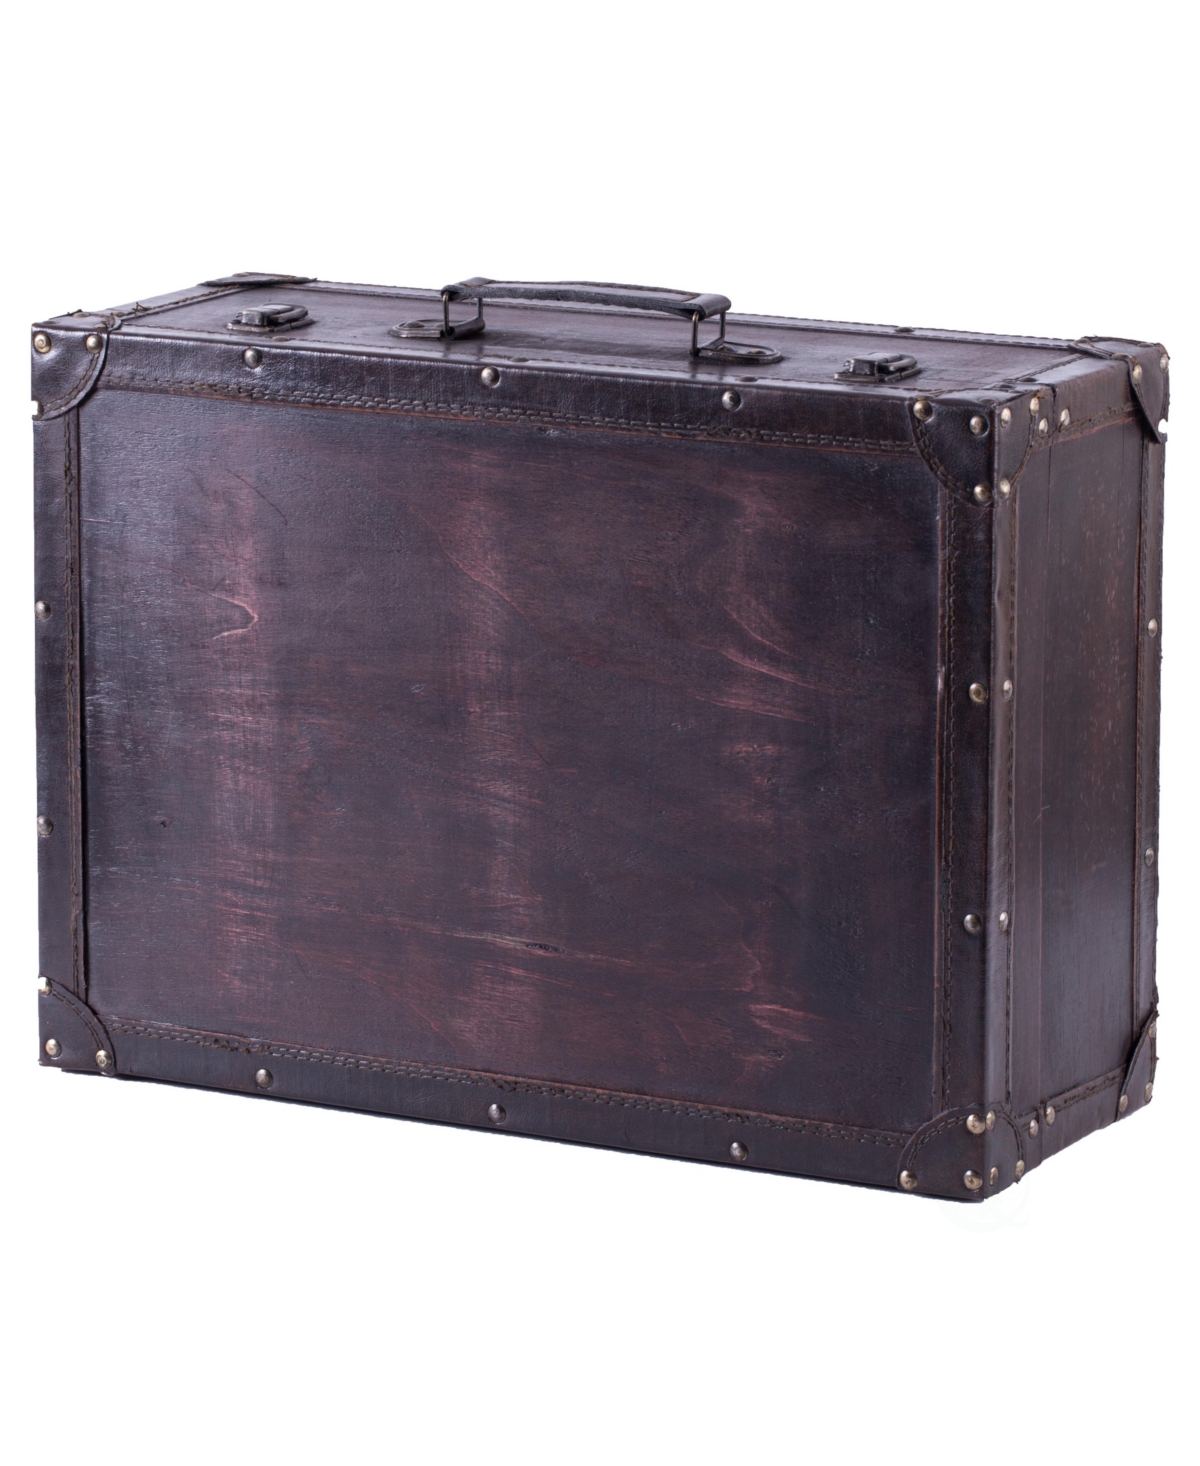 Vintiquewise Vintage-like Style Wooden Suitcase With Leather Trim In Brown